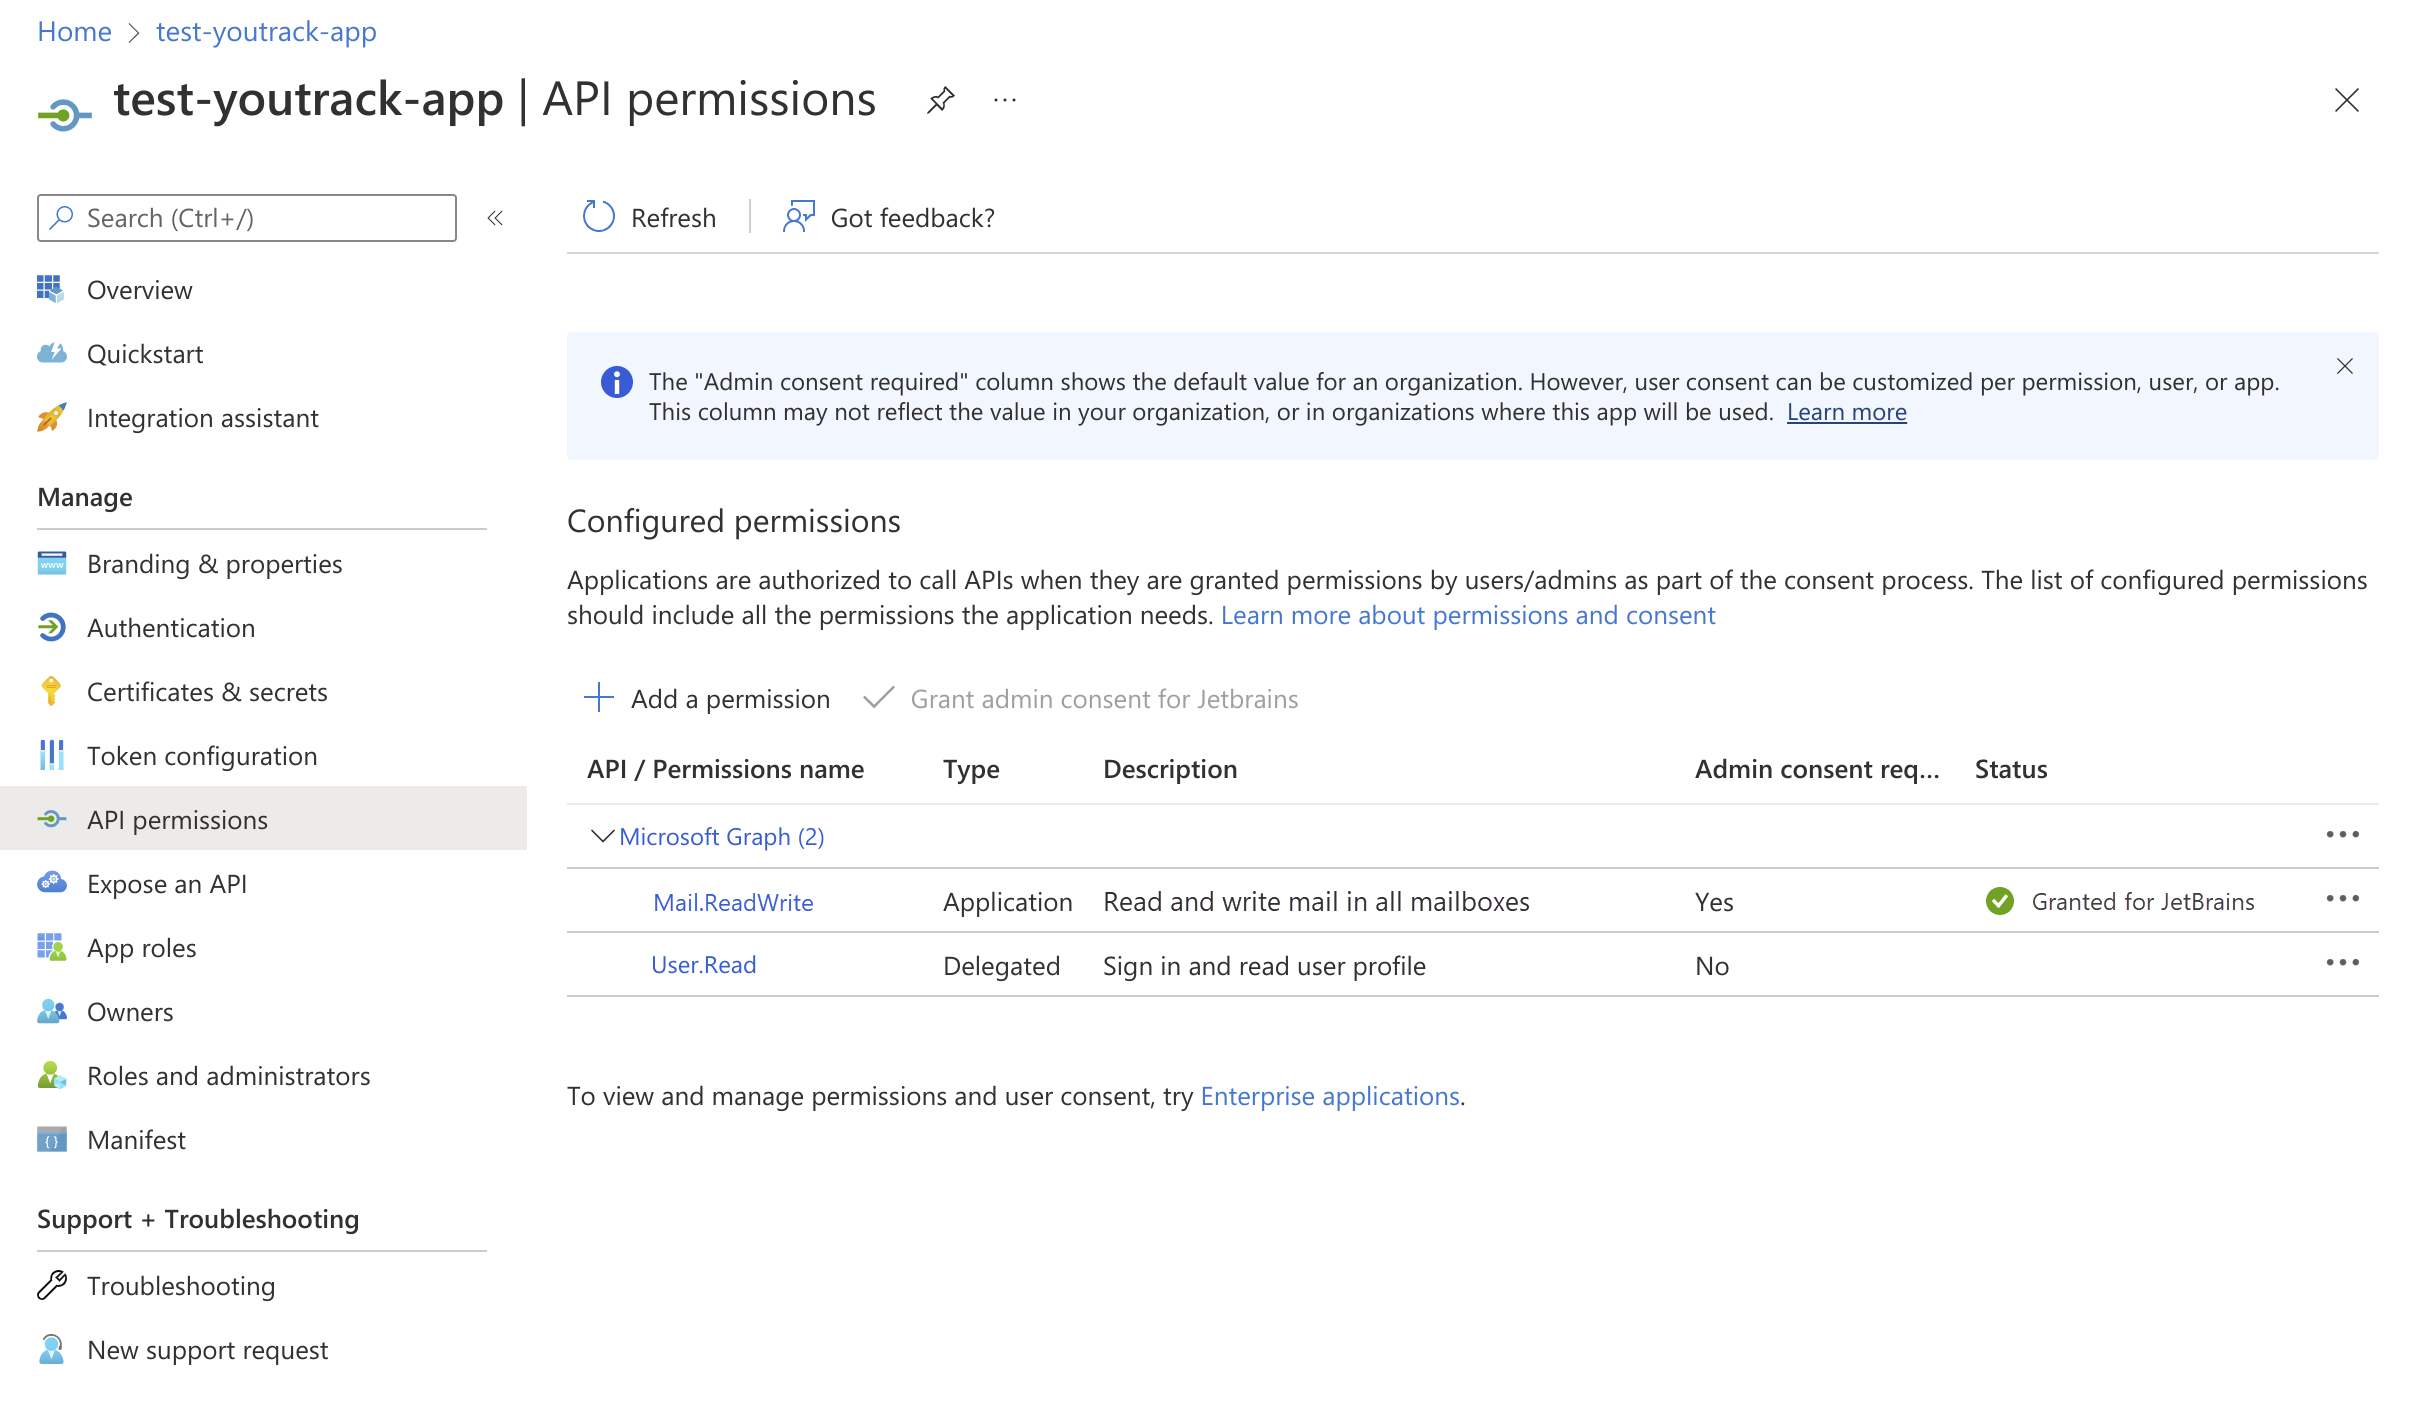 The API permission settings of a registered client application in Microsoft Azure.